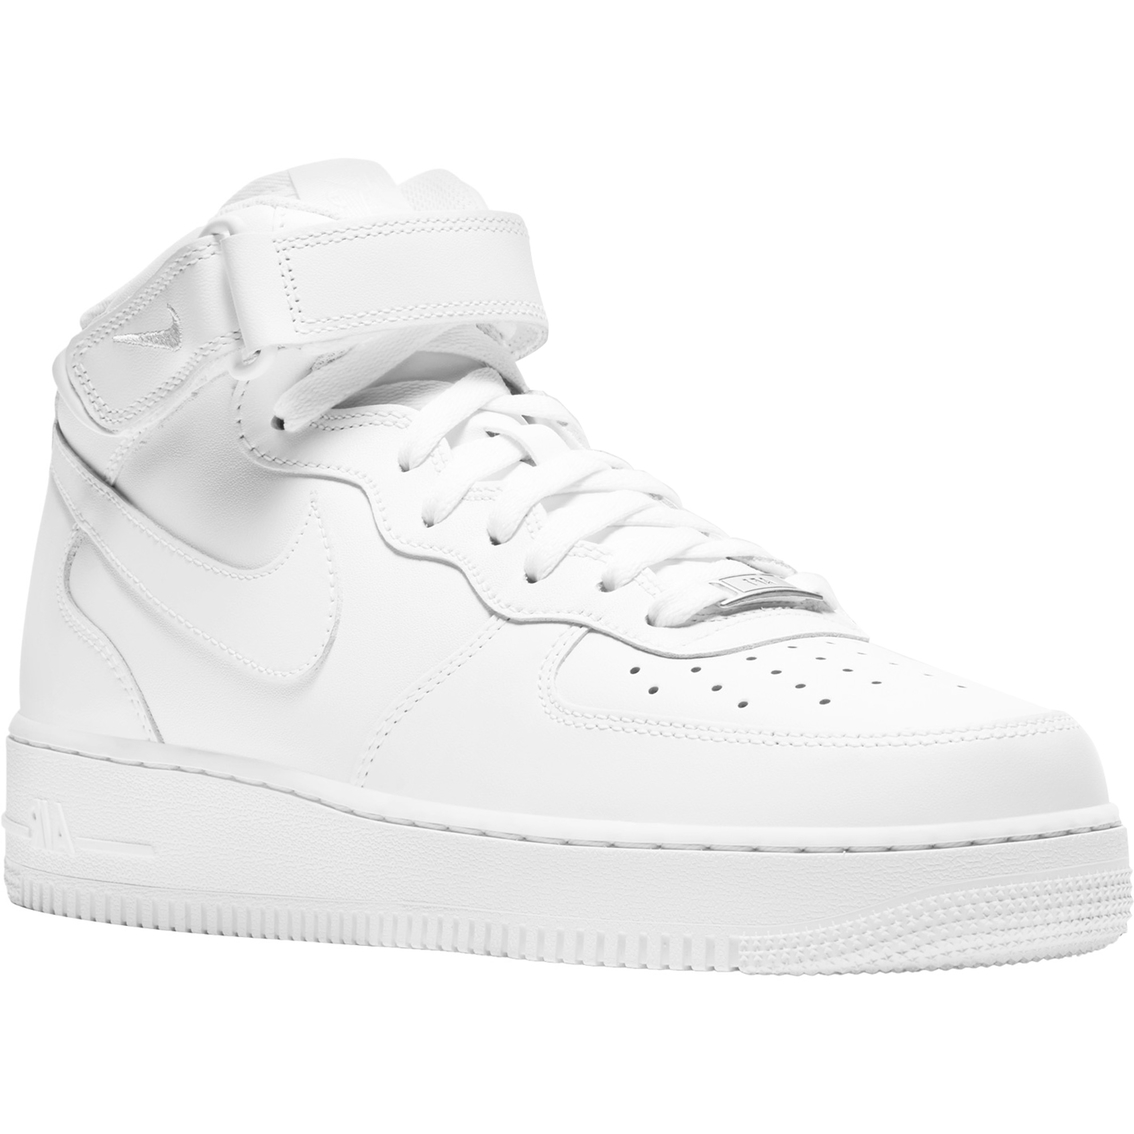 Nike Men's Air Force 1 Mid 07 Athleisure Shoes | Sneakers | Shoes ...